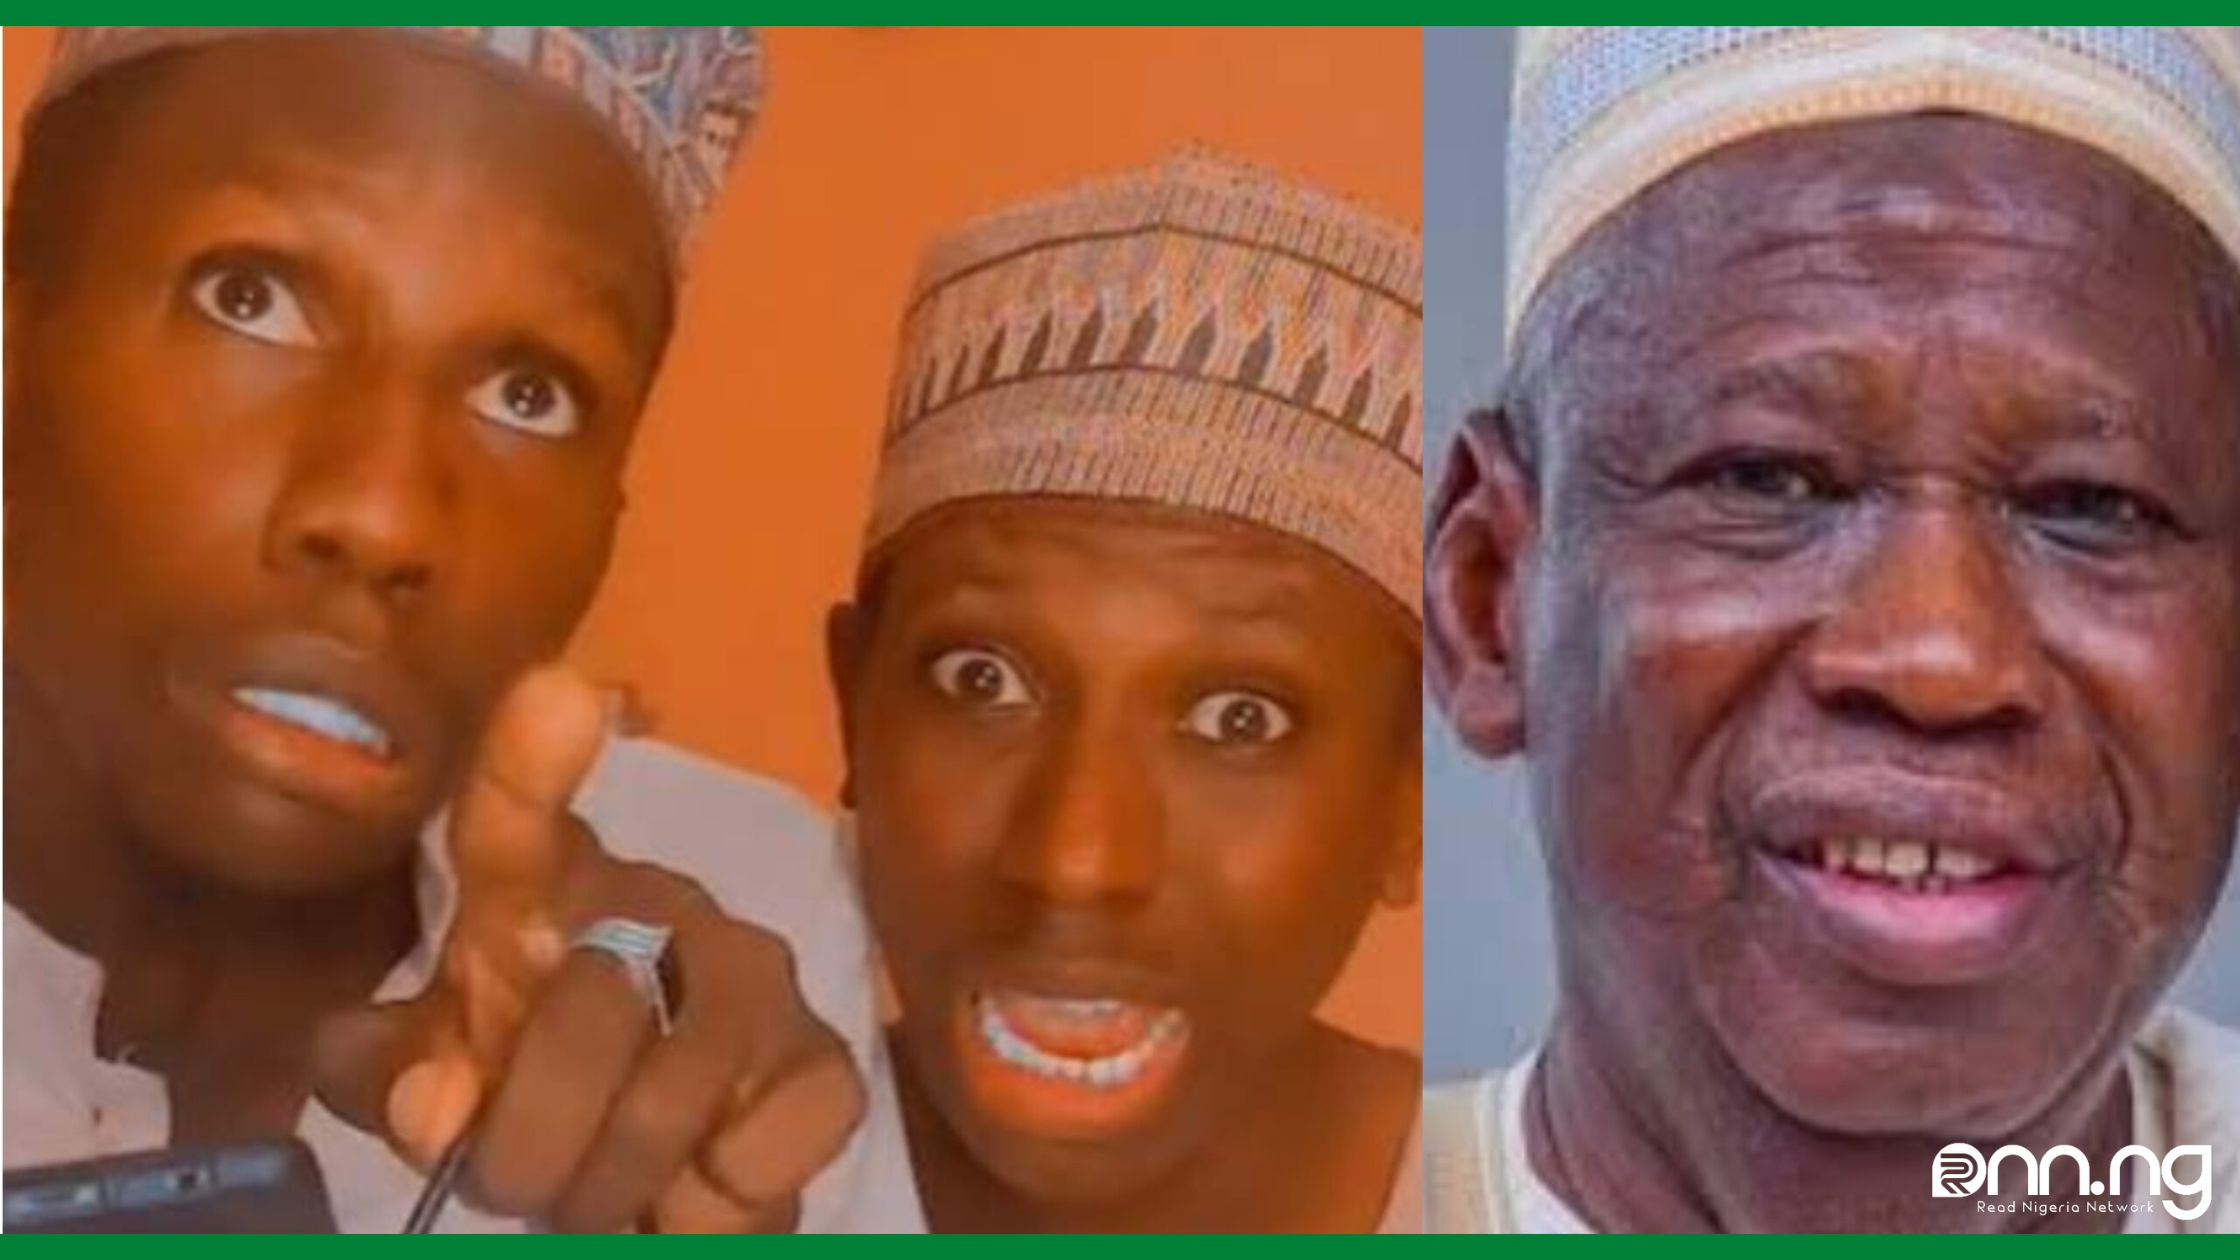 Ganduje: Skitmakers To Be Beaten Publicly For Defamation